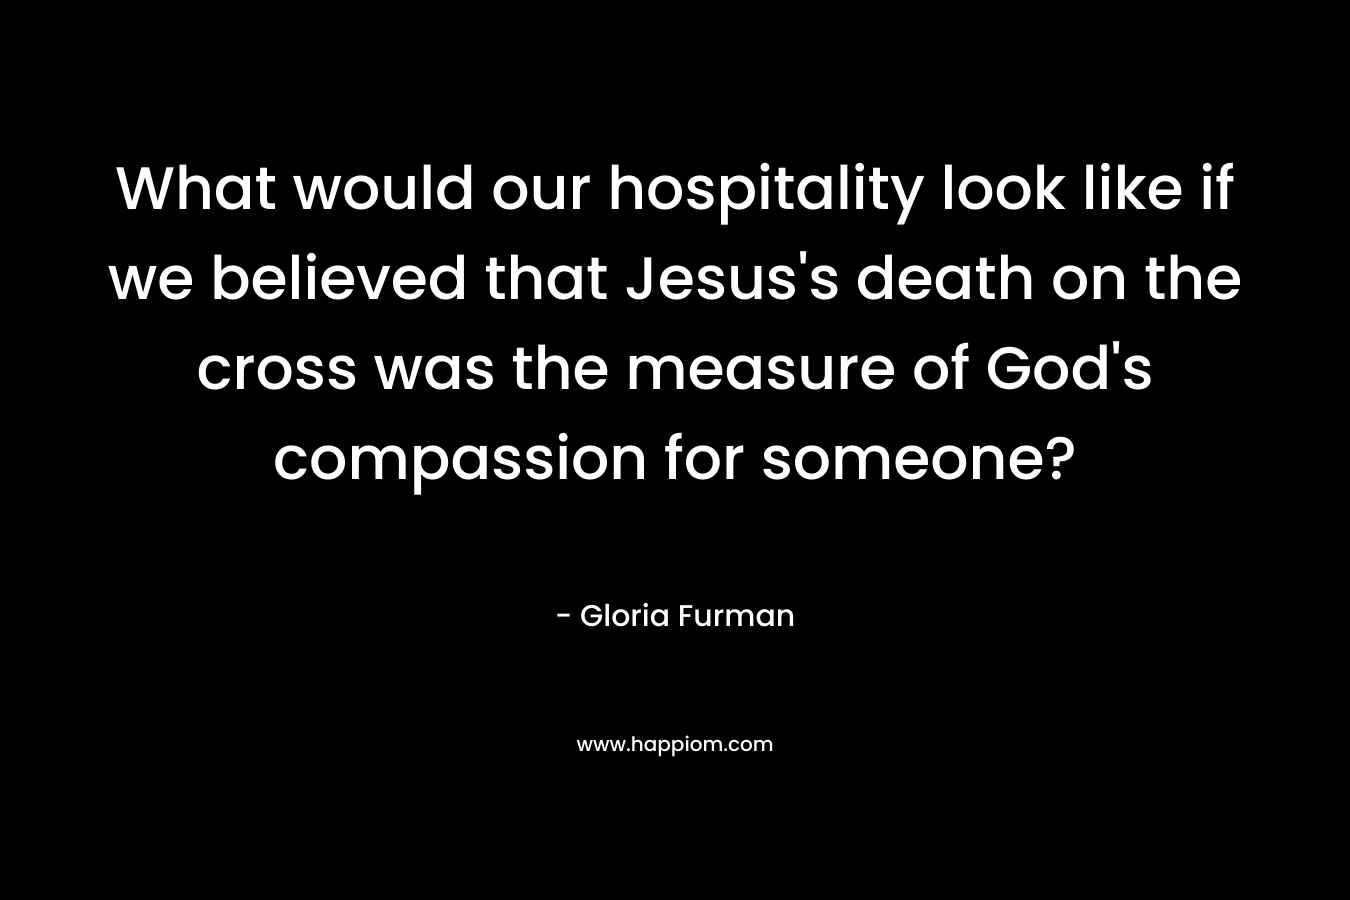 What would our hospitality look like if we believed that Jesus’s death on the cross was the measure of God’s compassion for someone? – Gloria Furman